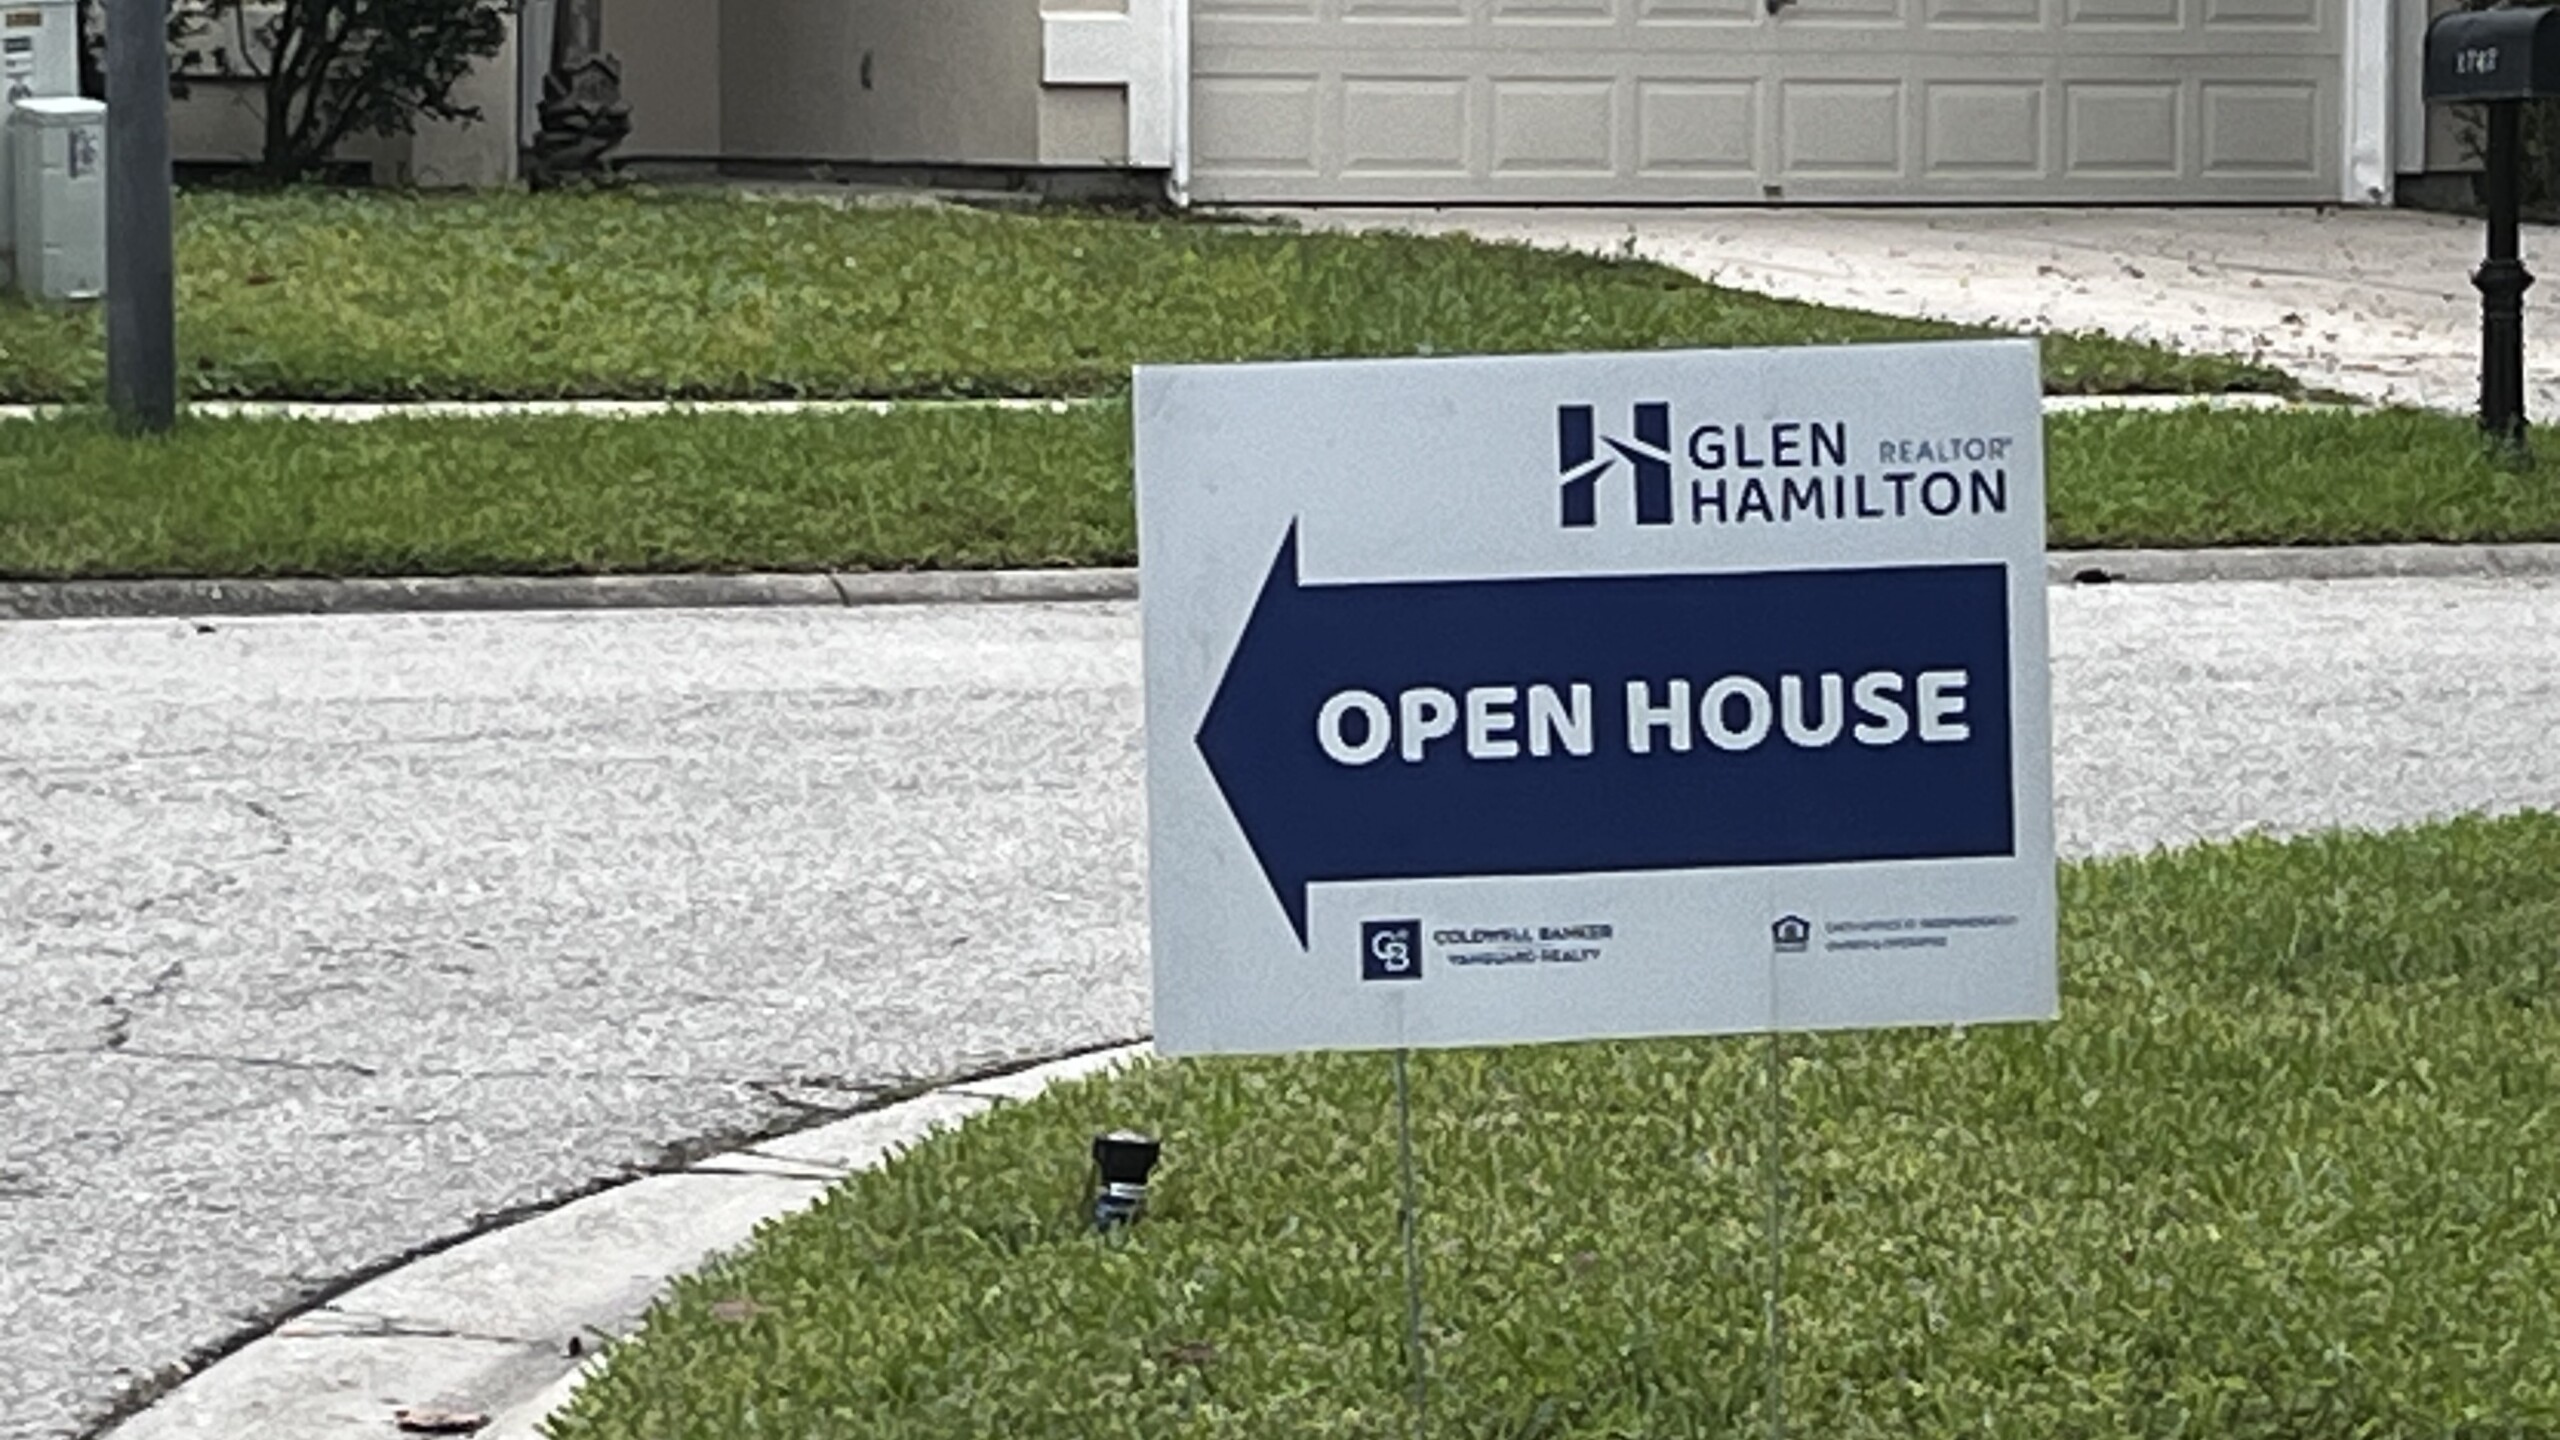 A sign points to an open house in Fleming Island. | Randy Roguski, WJCT News 89.9